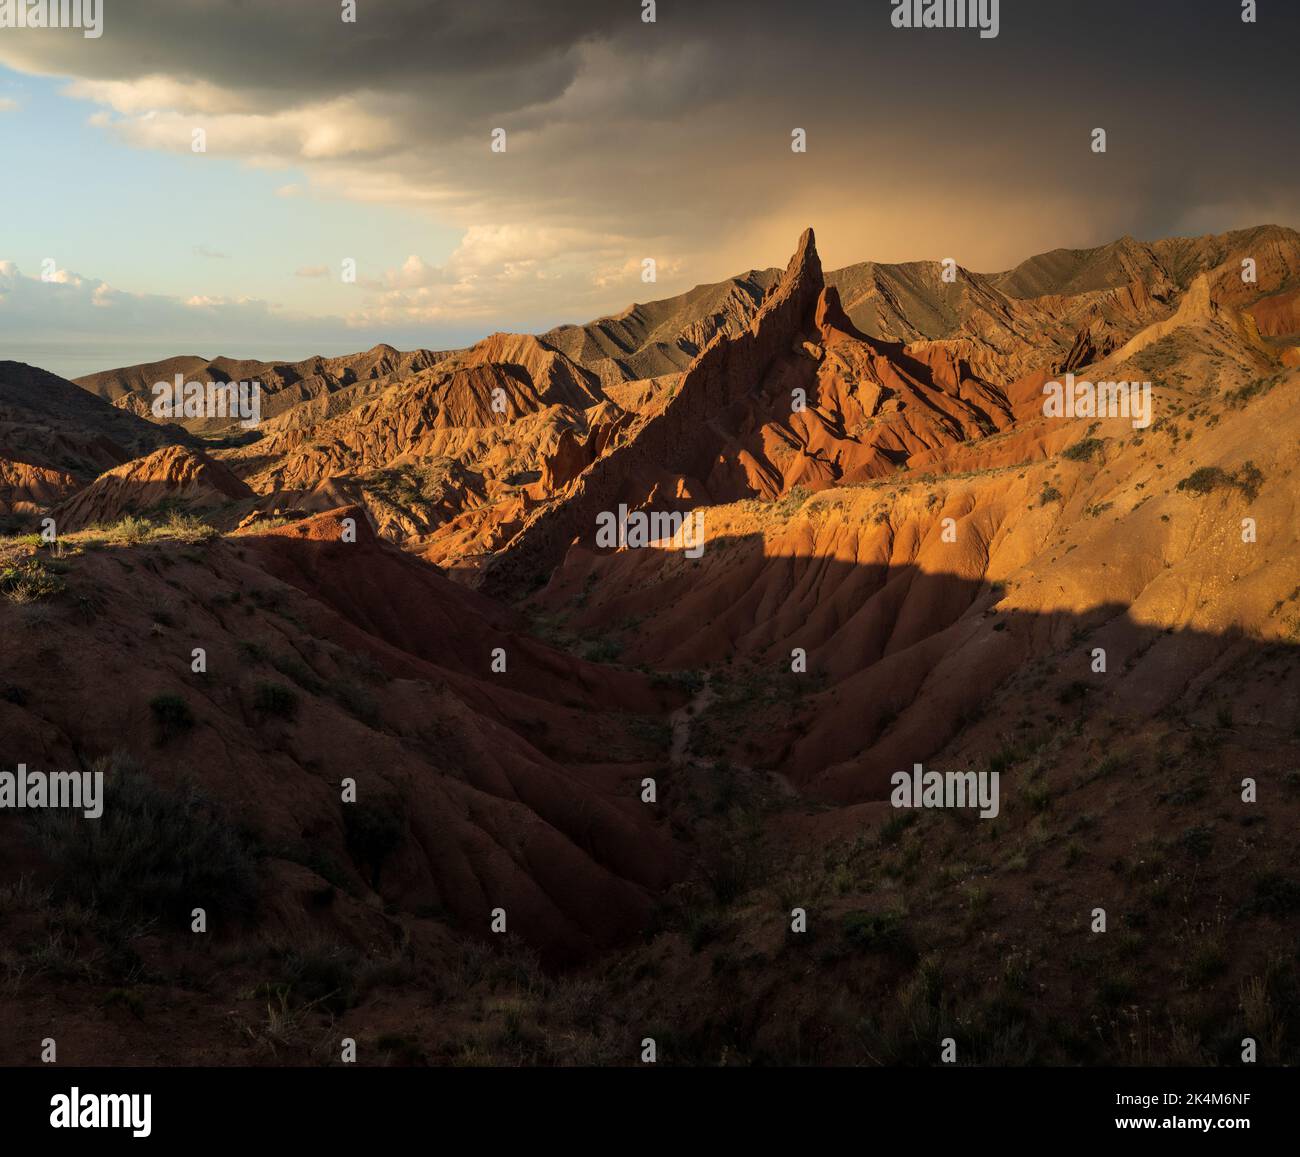 Sharp rock formations and dramatic sunset at colourful Skazka Fairytale Canyon in Issyk-Kul region, Kyrgyzstan Stock Photo